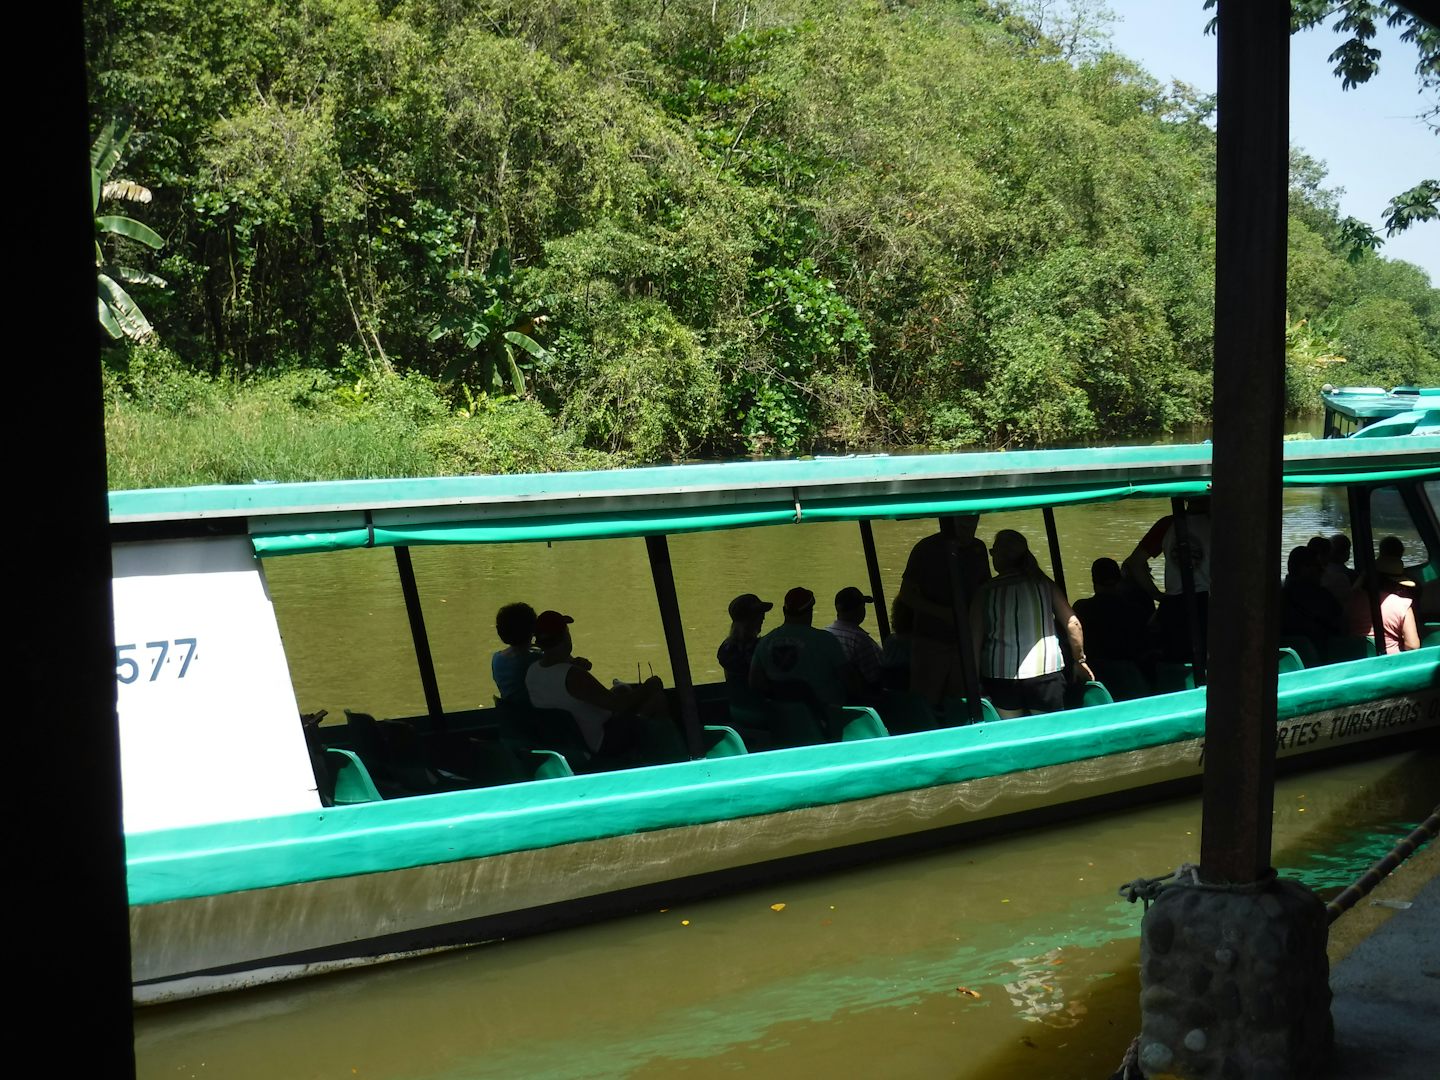 Part of our Costa Rica excursion was a river ride in a boat like this.  won